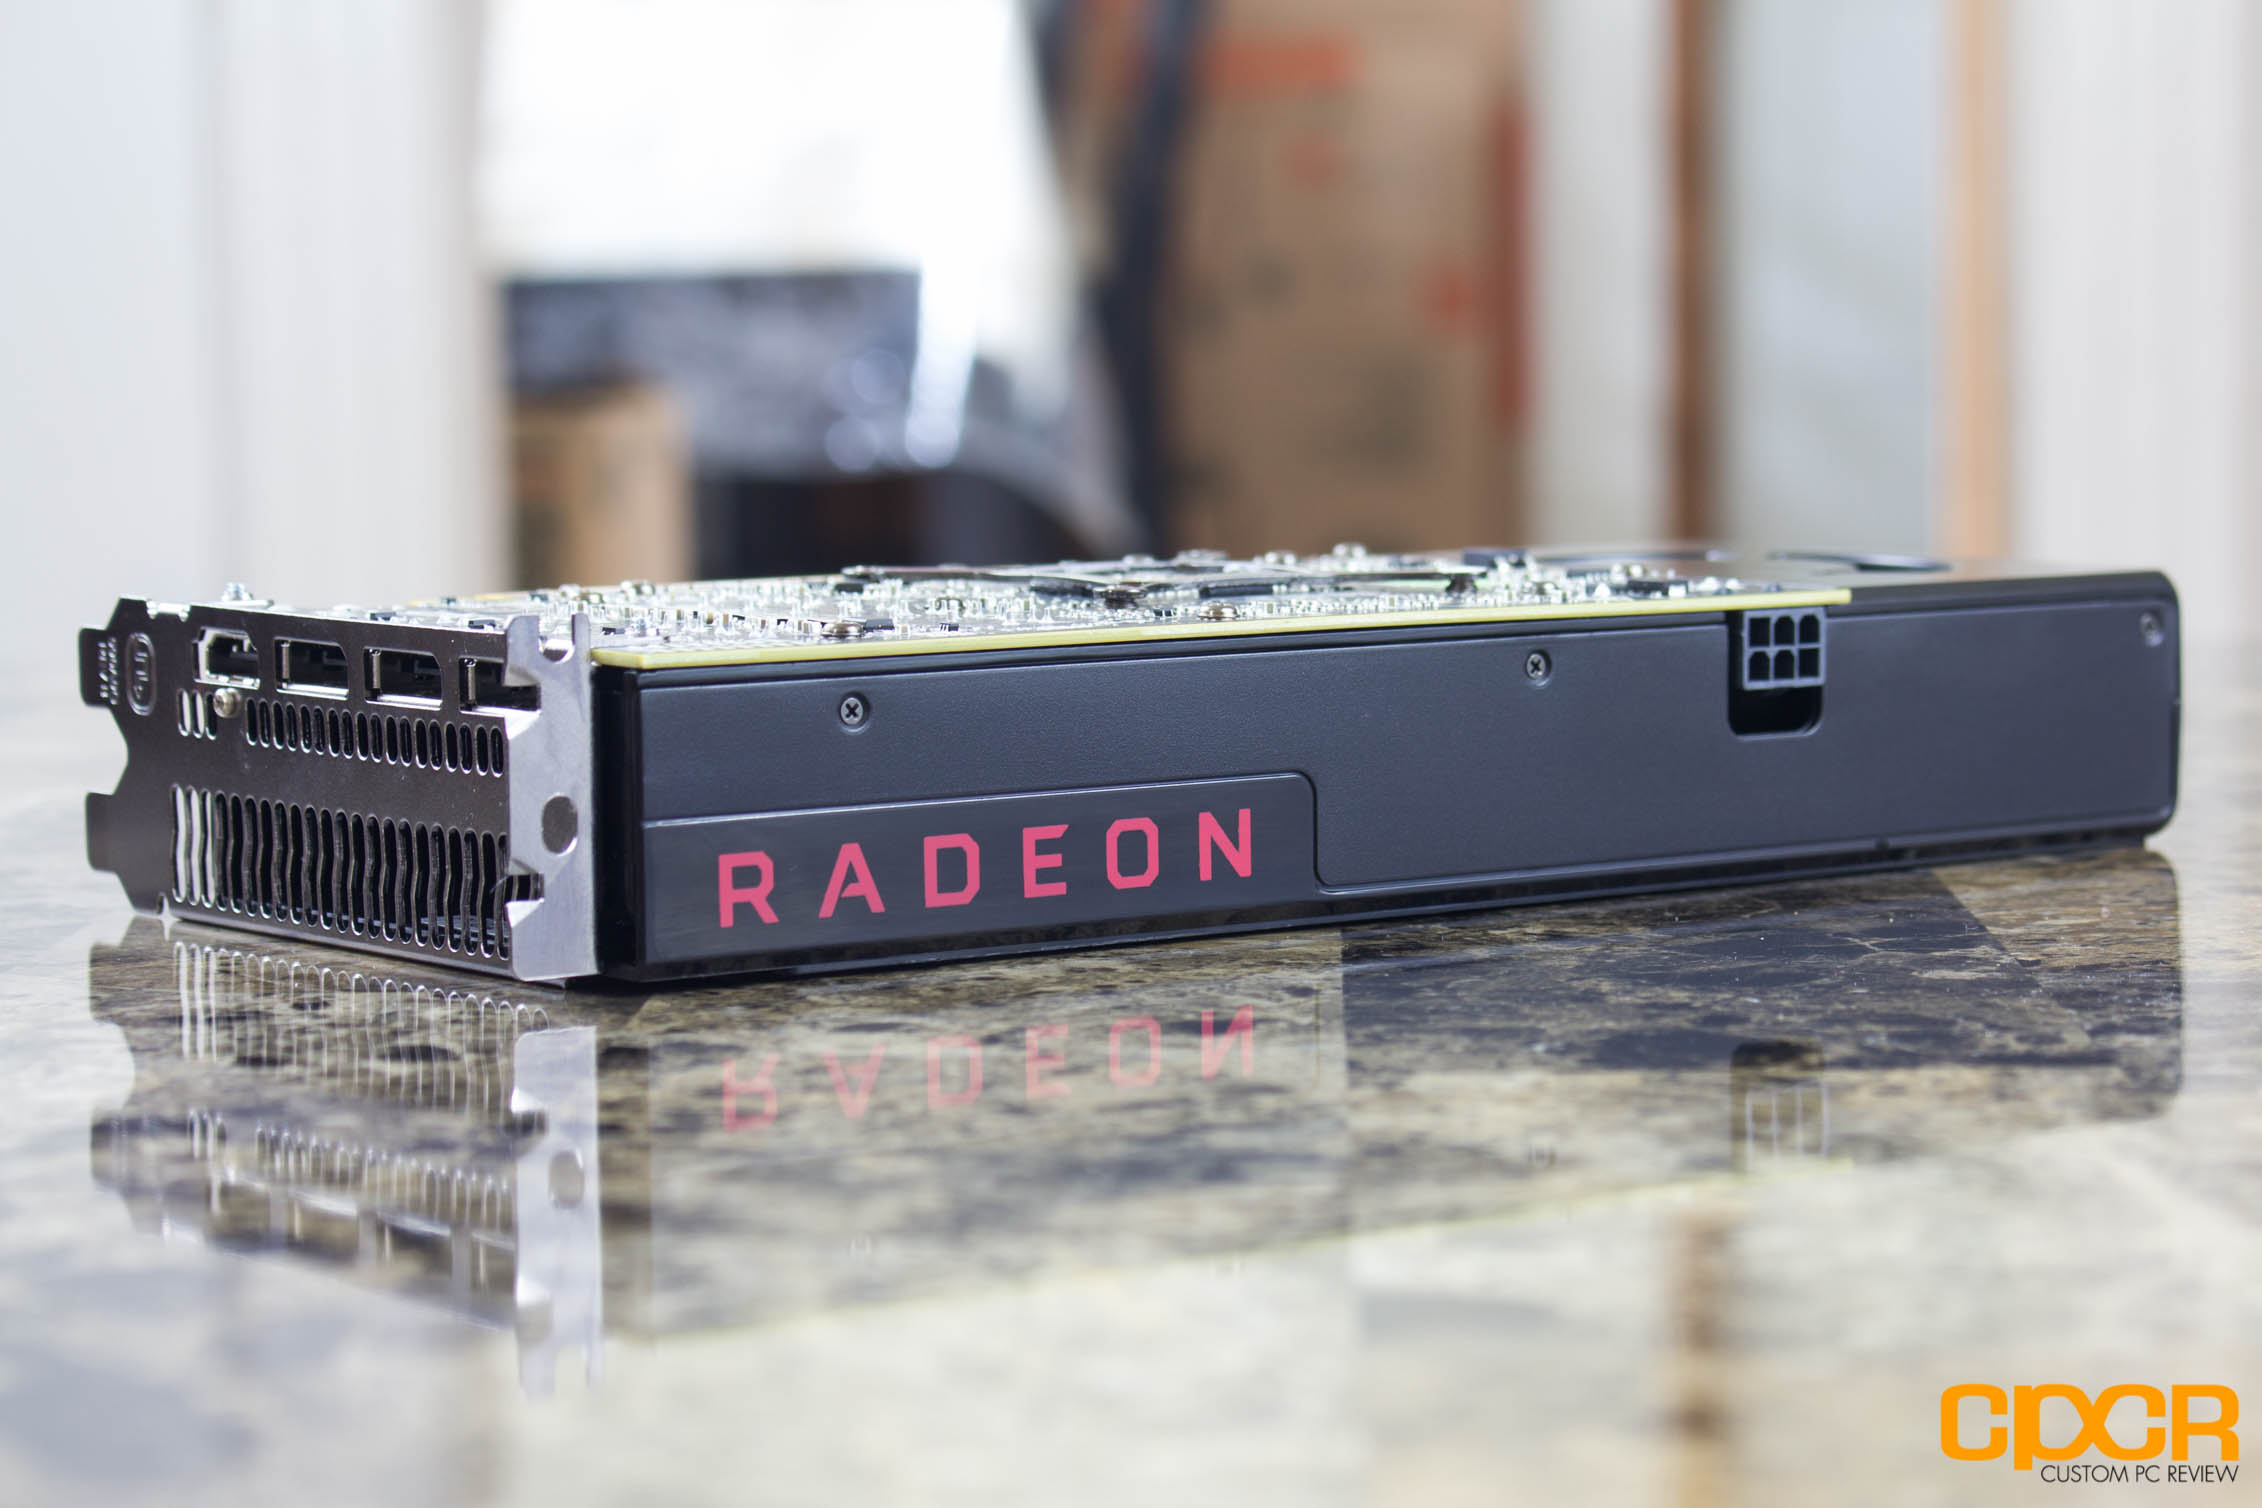 AMD Releases Radeon Crimson 16.7.1 Driver – Addresses Power Issues with RX 480